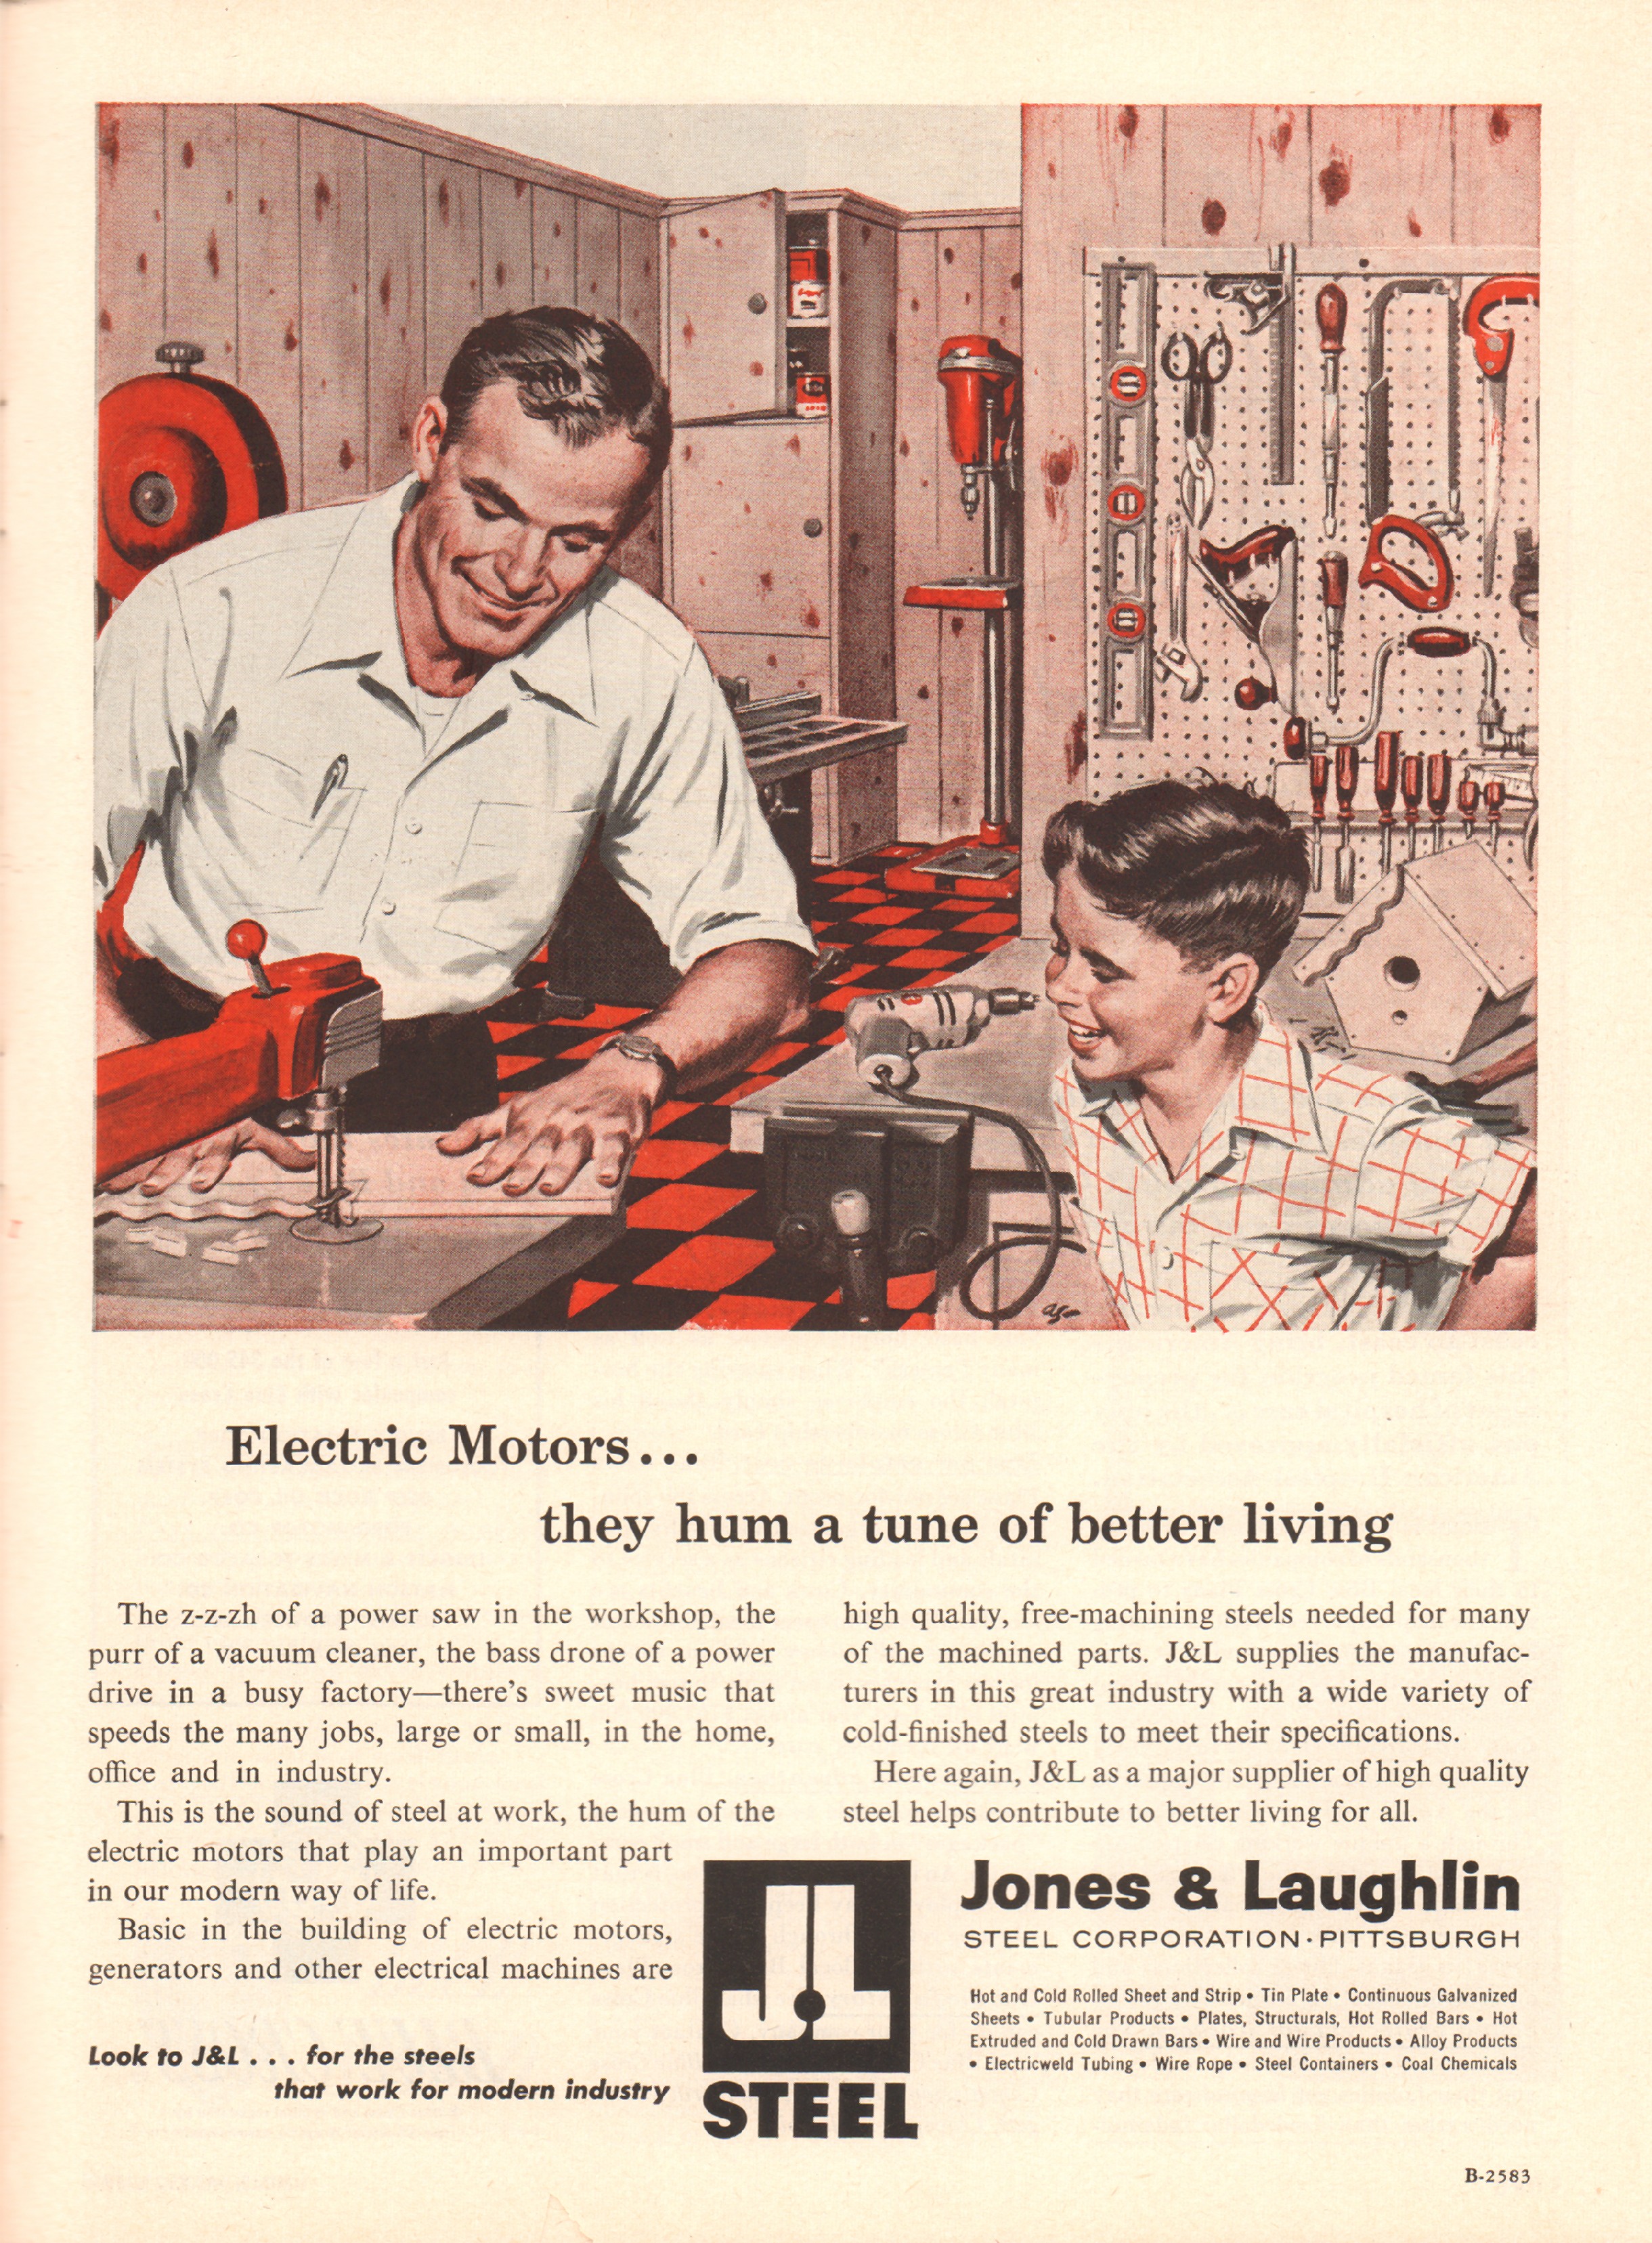 Jones and Laughlin Steel Corporation - published in Time - May 21, 1956